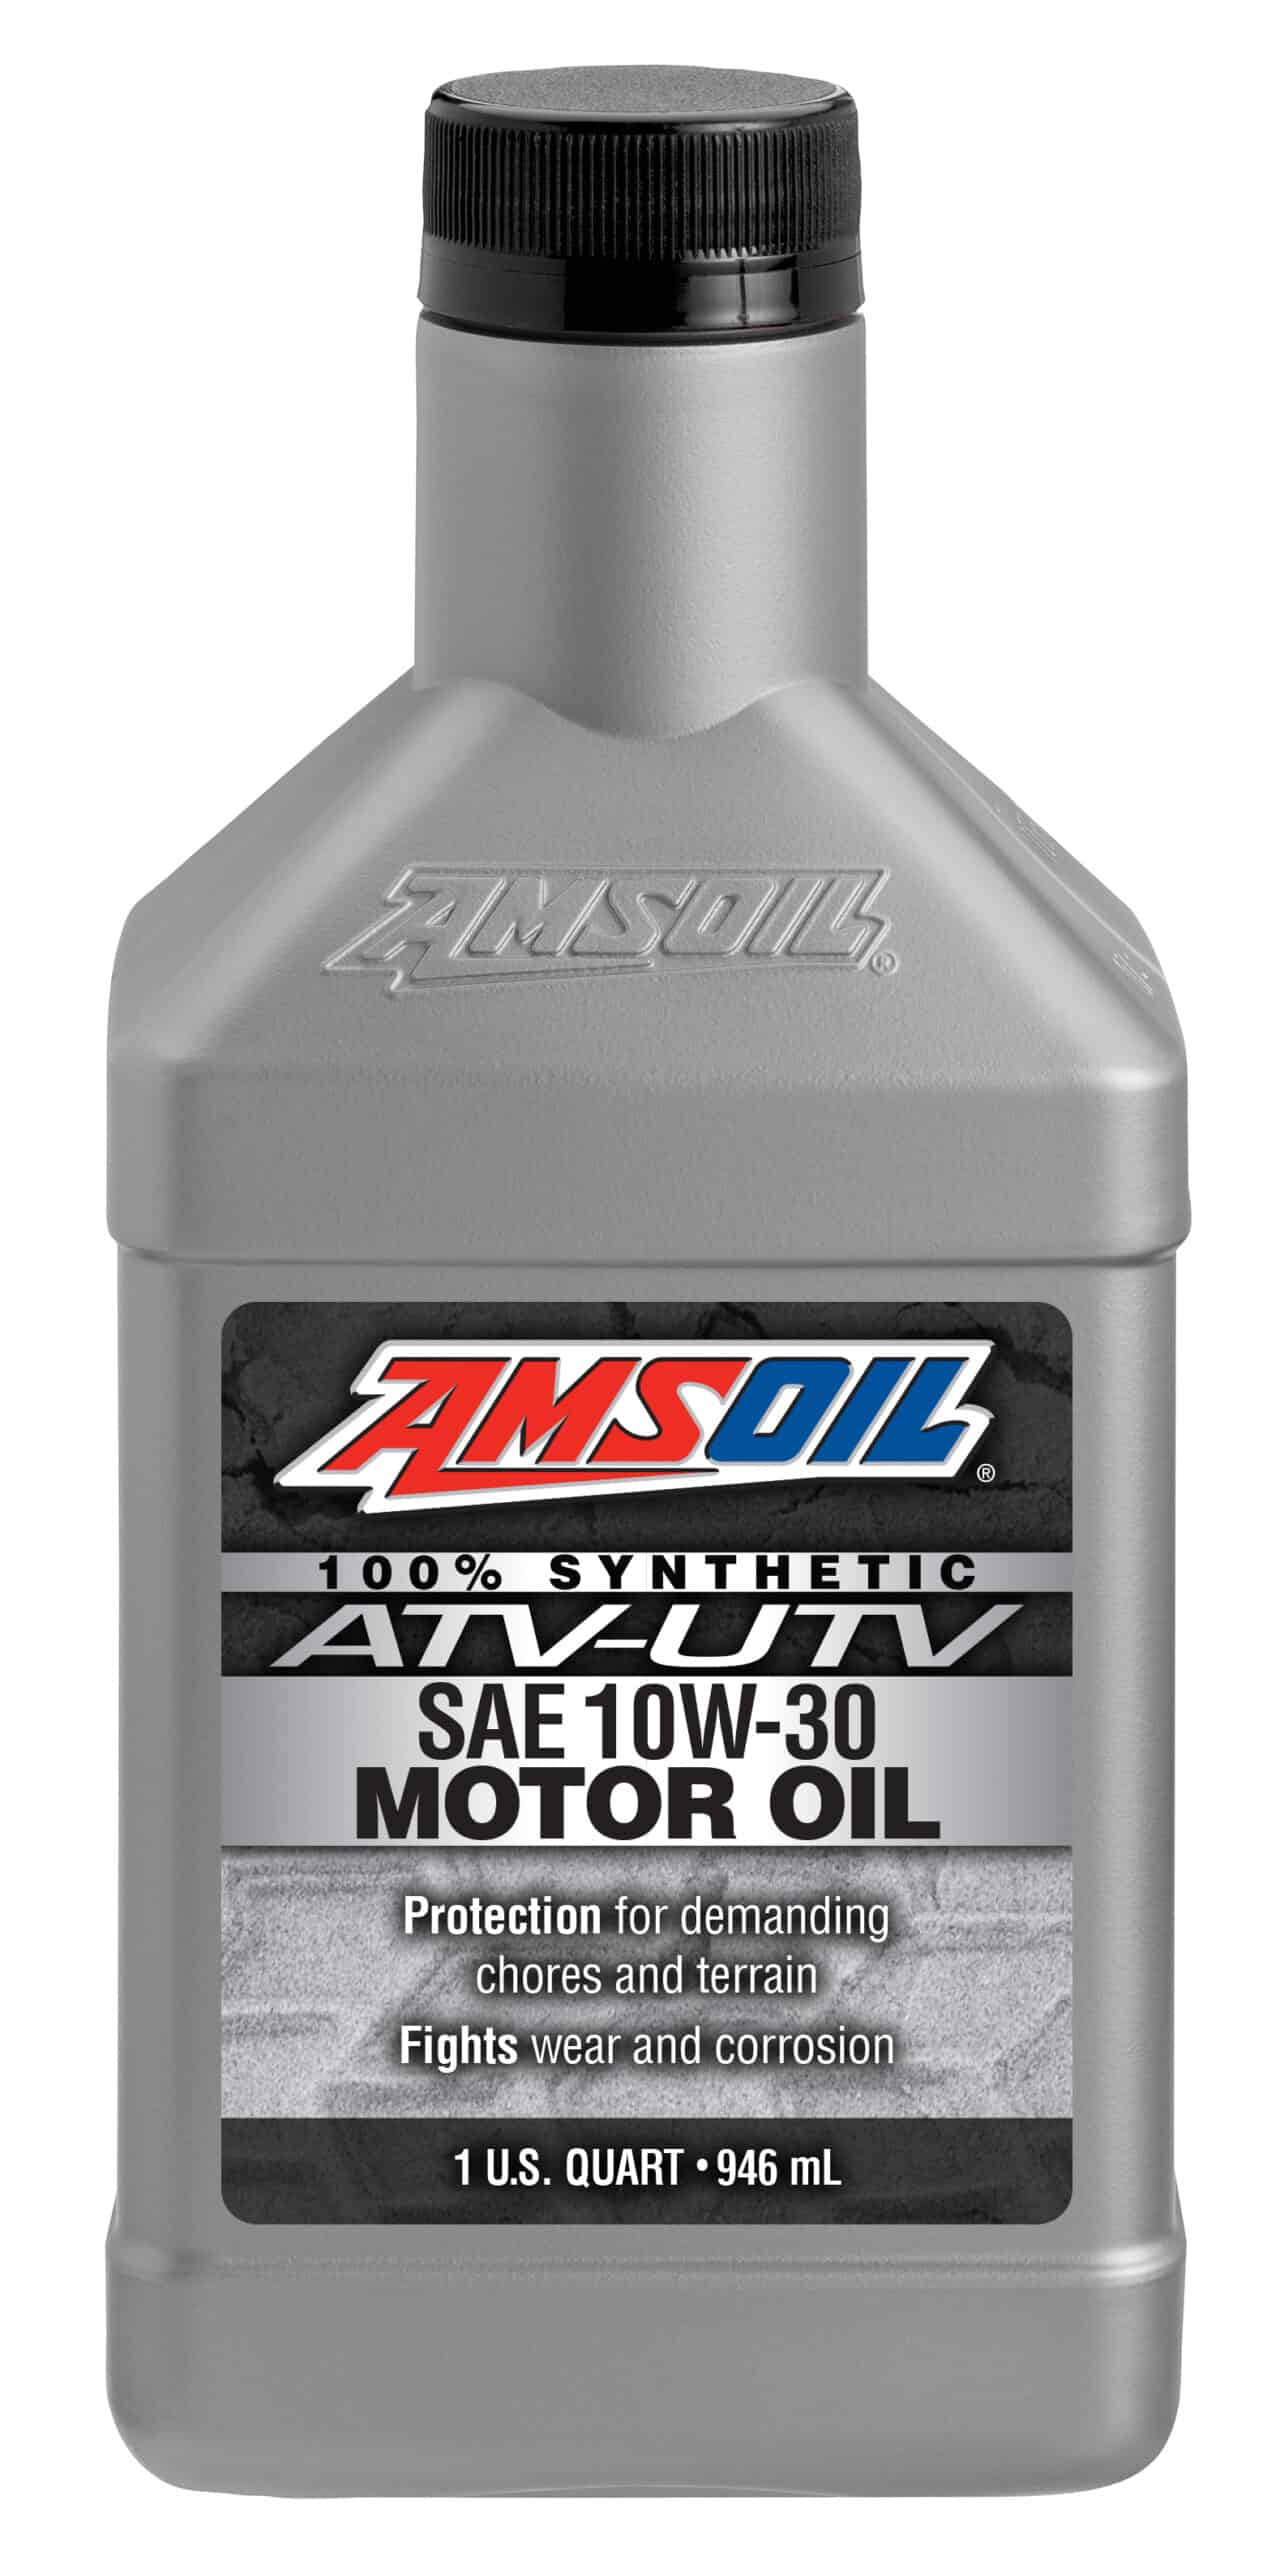 A bottle of AMSOIL Synthetic ATV/UTV Motor Oil, which is formulated to deliver upgraded performance for hard-working and performance ATVs and UTVs.